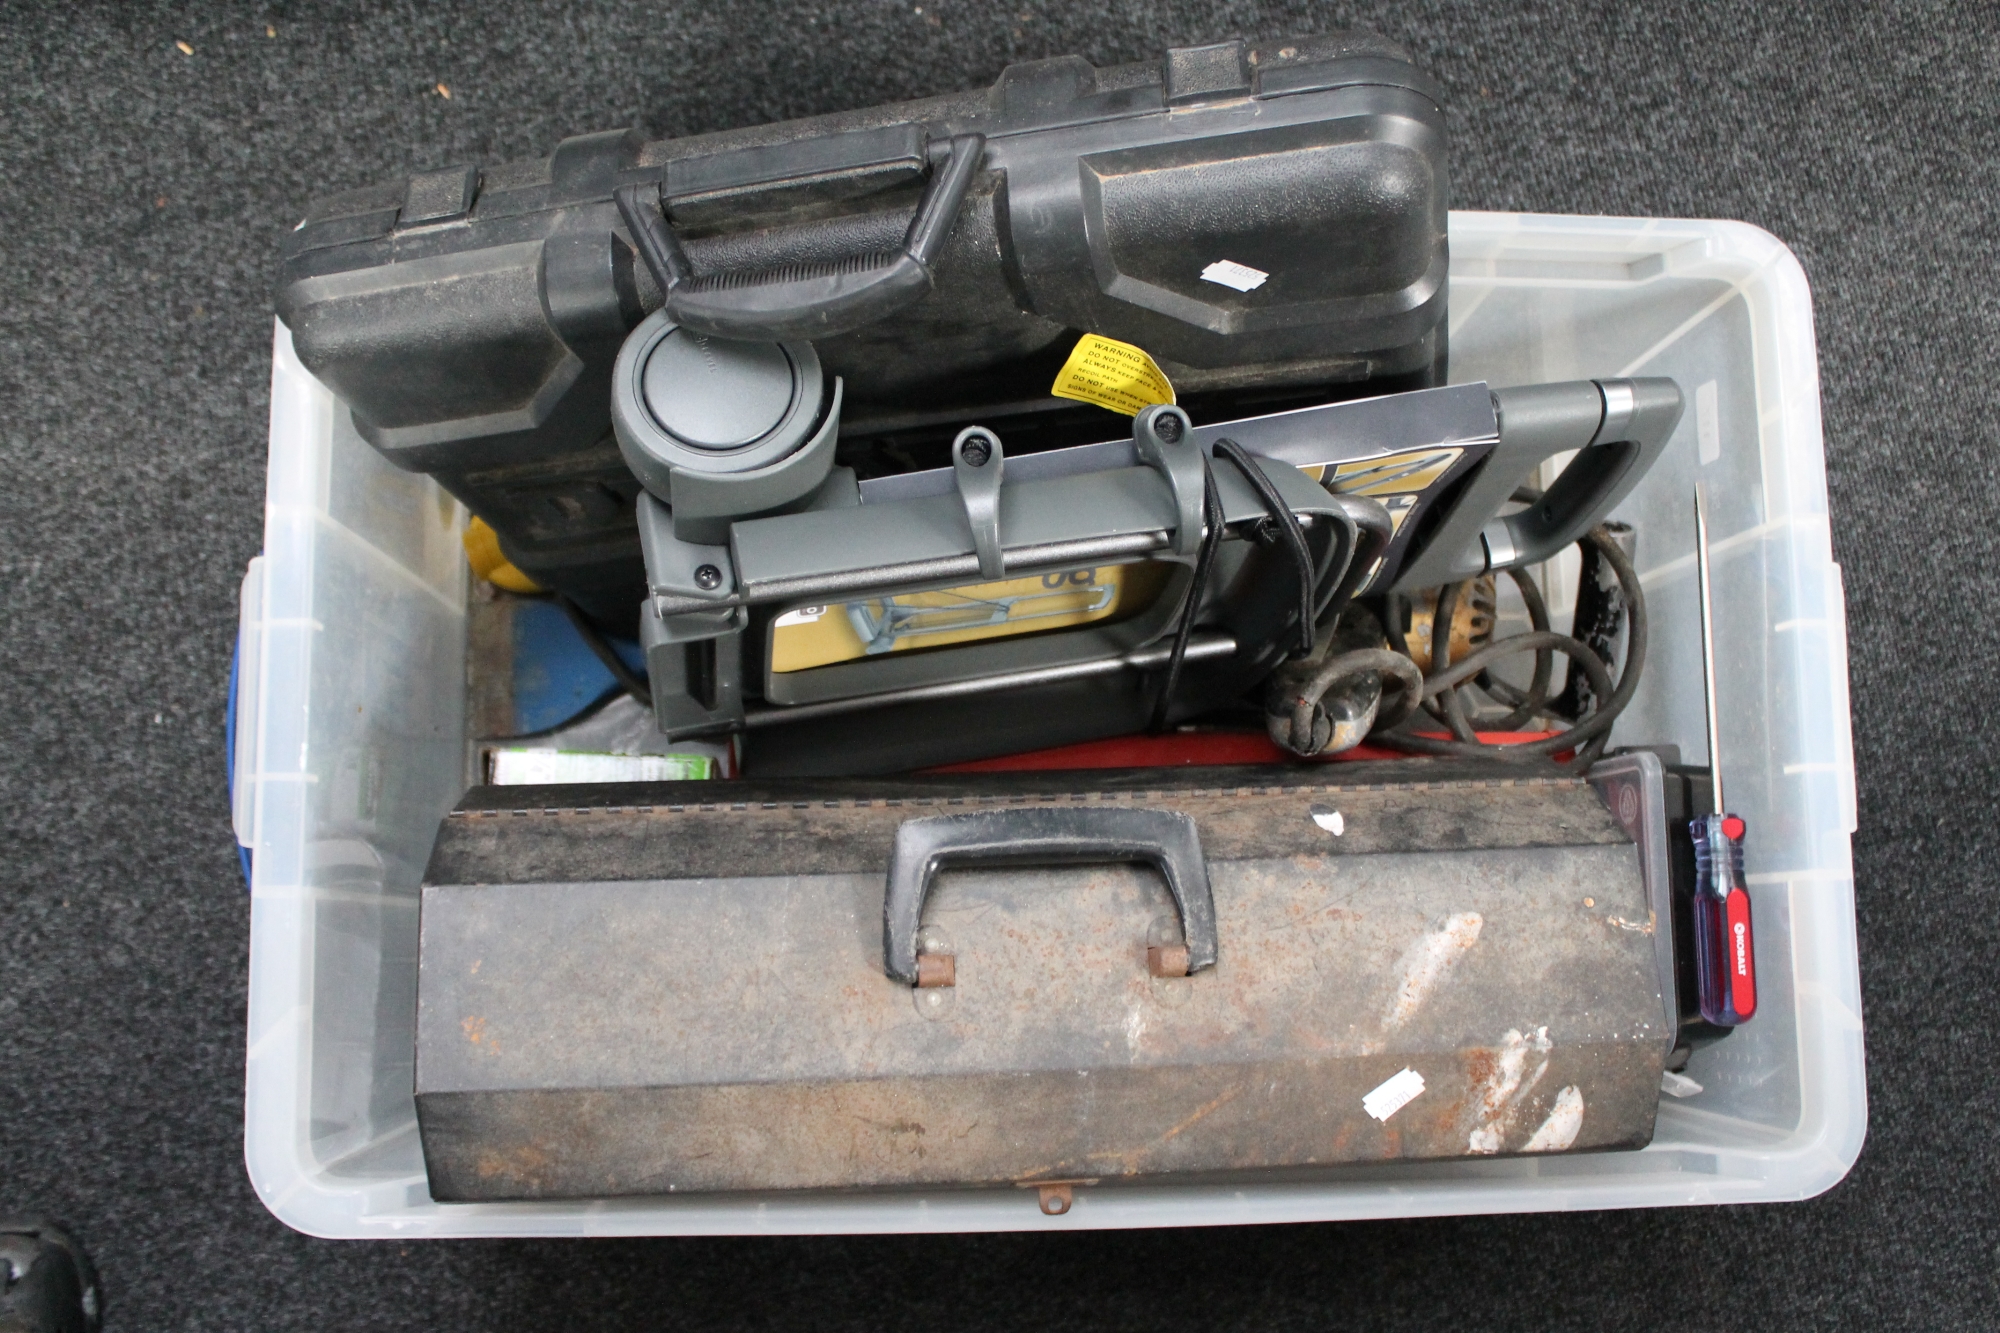 A box of metal tool box and hand tools, electric drill, cased tool kit,